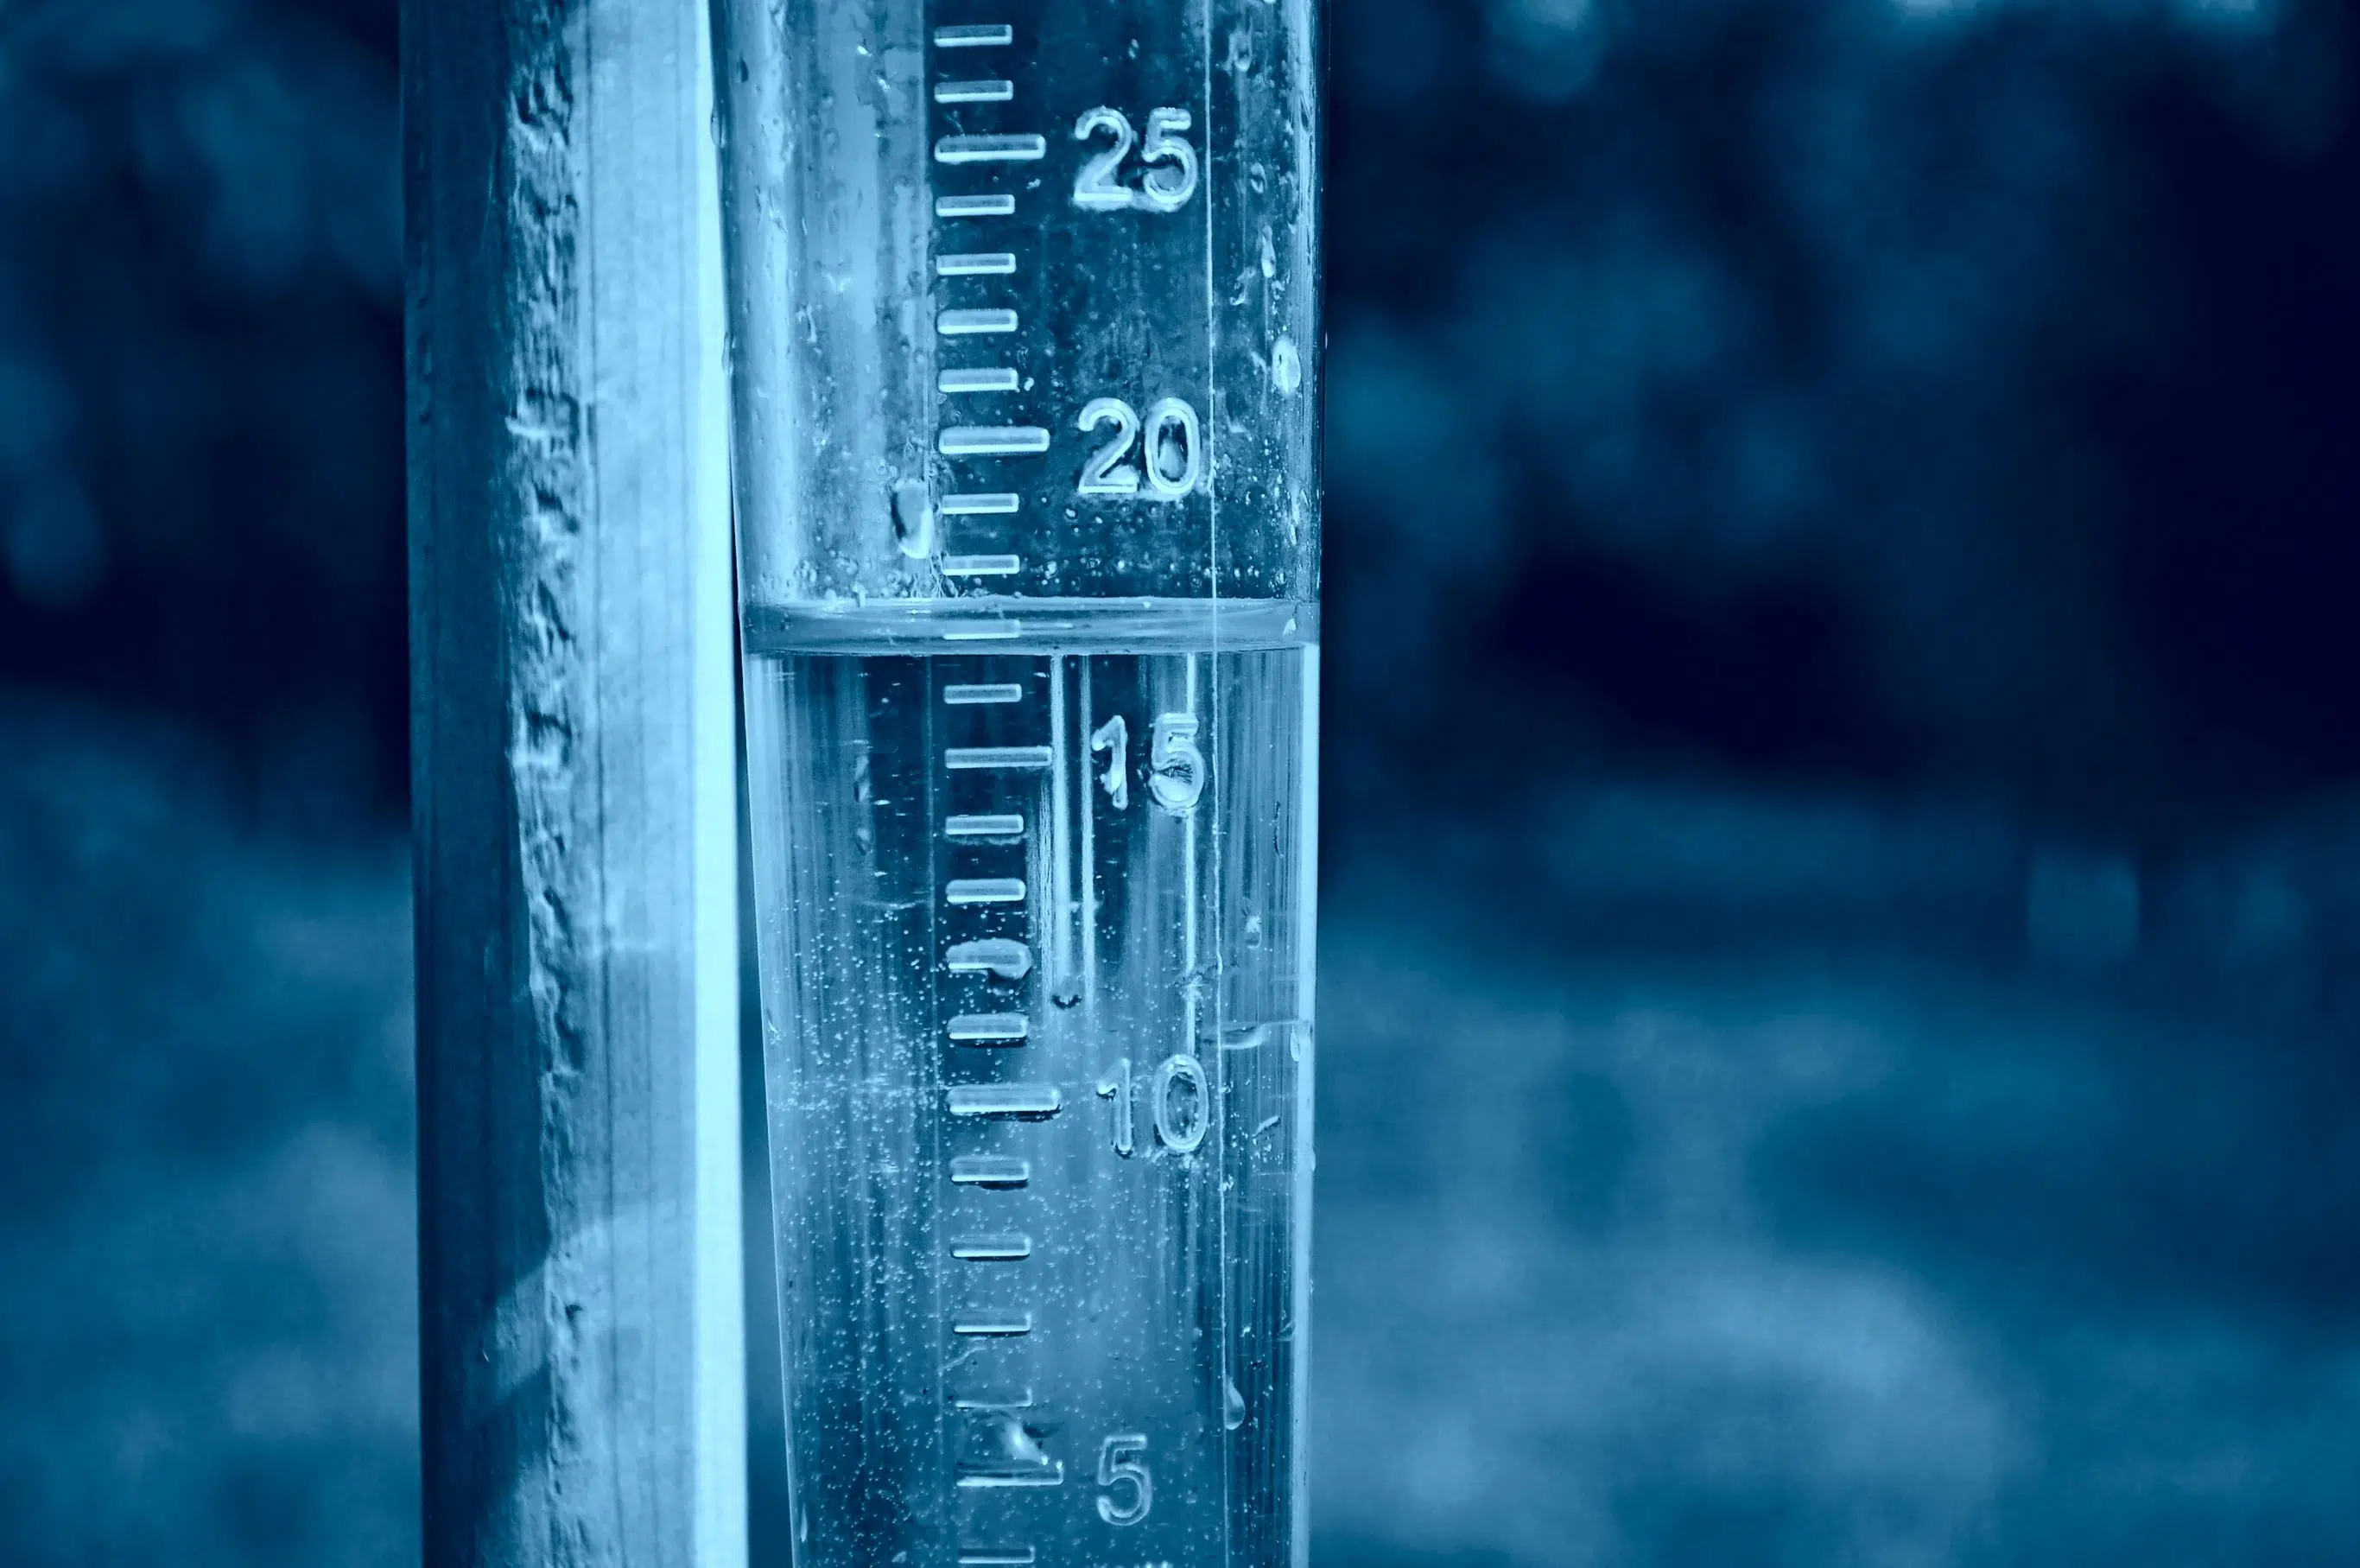 Evansburg and surrounding area receives significant precipitation in recent days